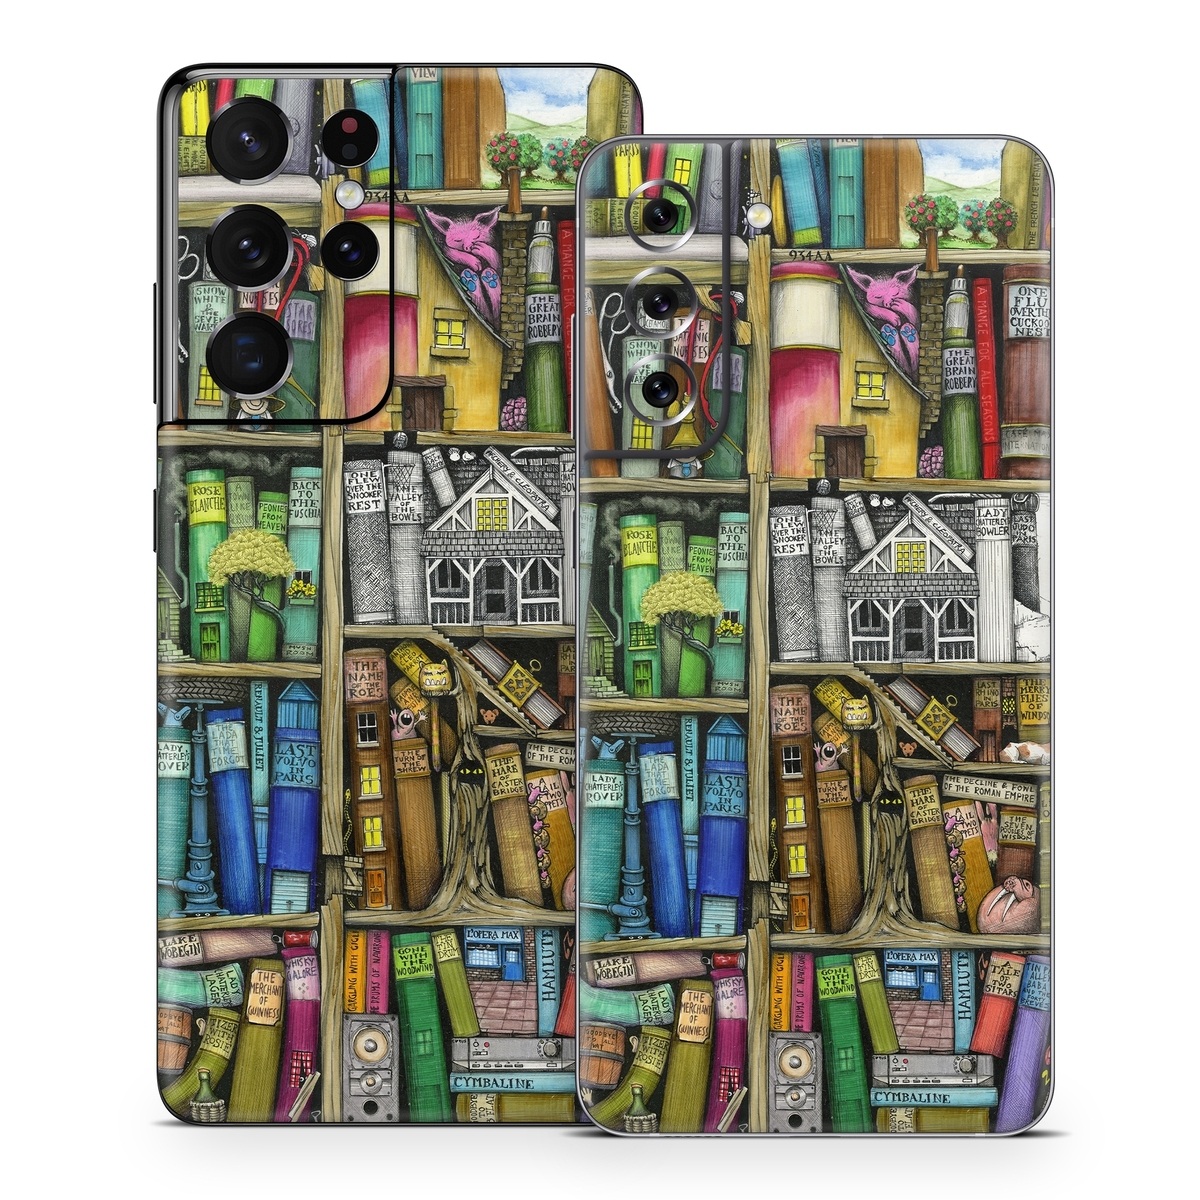 Samsung Galaxy S21 Series Skin design of Collection, Art, Visual arts, Bookselling, Shelving, Painting, Building, Shelf, Publication, Modern art, with brown, green, blue, red, pink colors